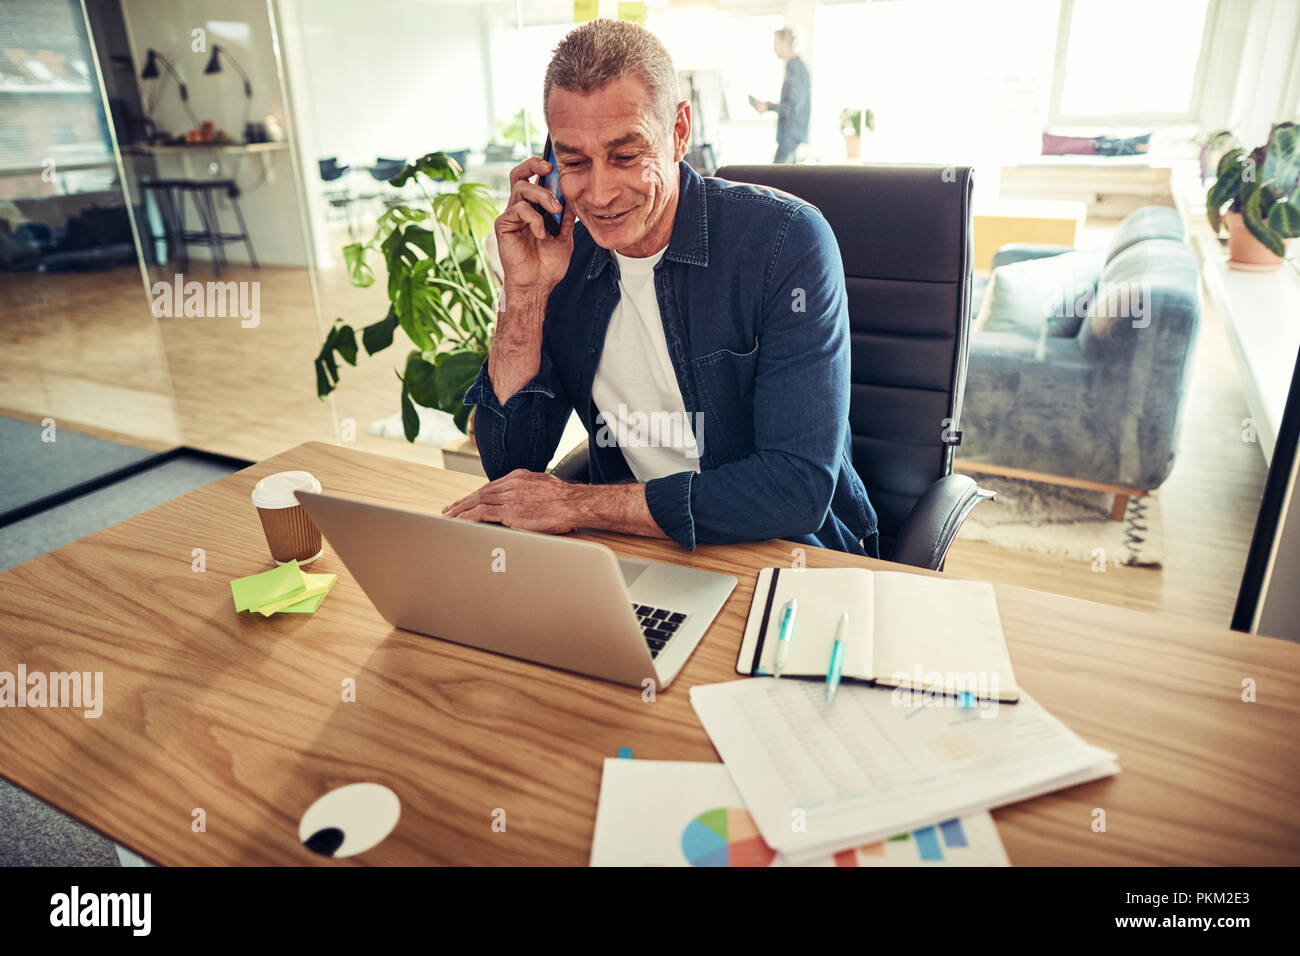 Smiling mature businessman talking on his cellphone and working online with a laptop while sitting at his desk in an office Stock Photo